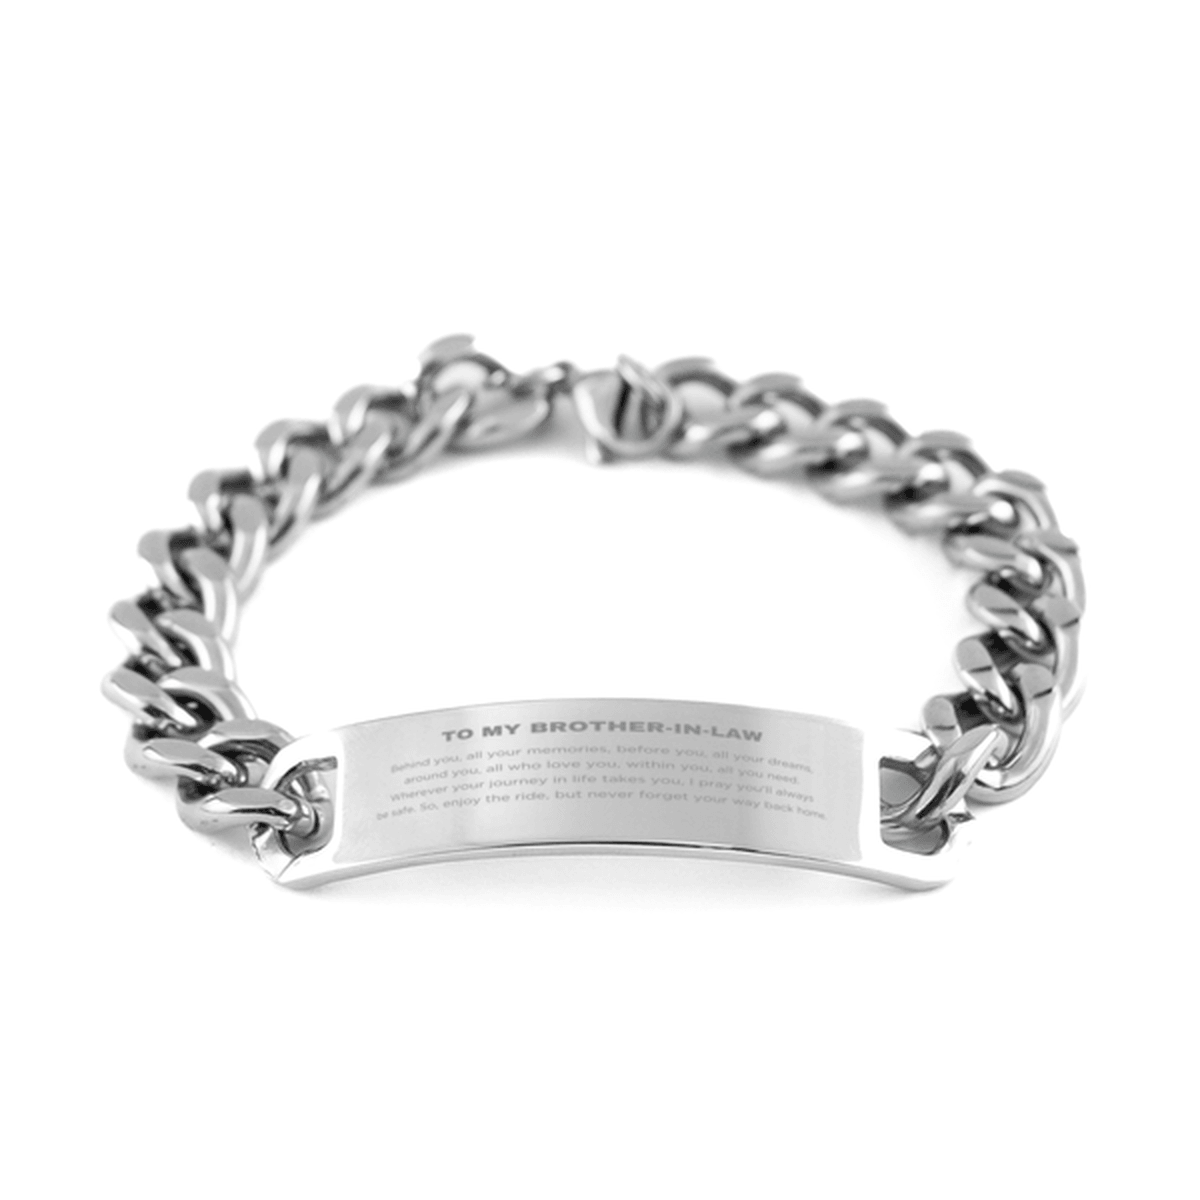 Inspirational Brother-In-Law Cuban Chain Stainless Steel Bracelet - Behind you, all your Memories, Before you, all your Dreams - Birthday, Christmas Holiday Gifts - Mallard Moon Gift Shop